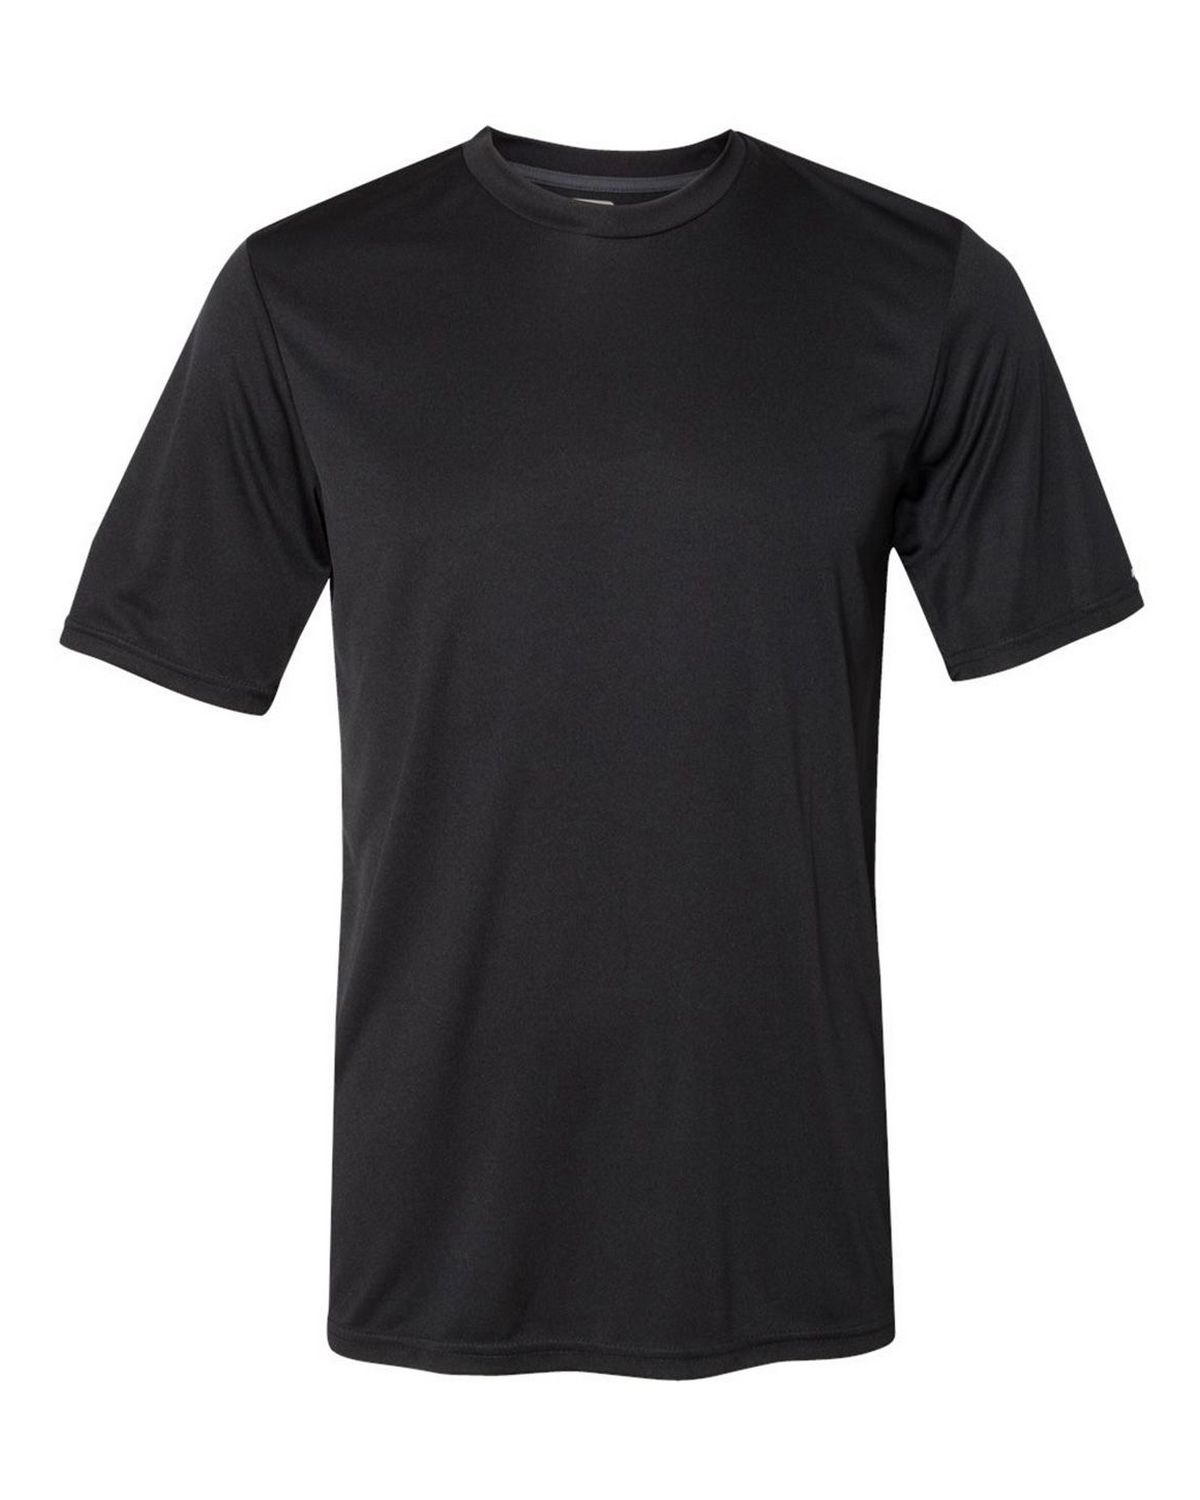 Russell Athletic 629X2M Mens Core Short Sleeve Performance Tee